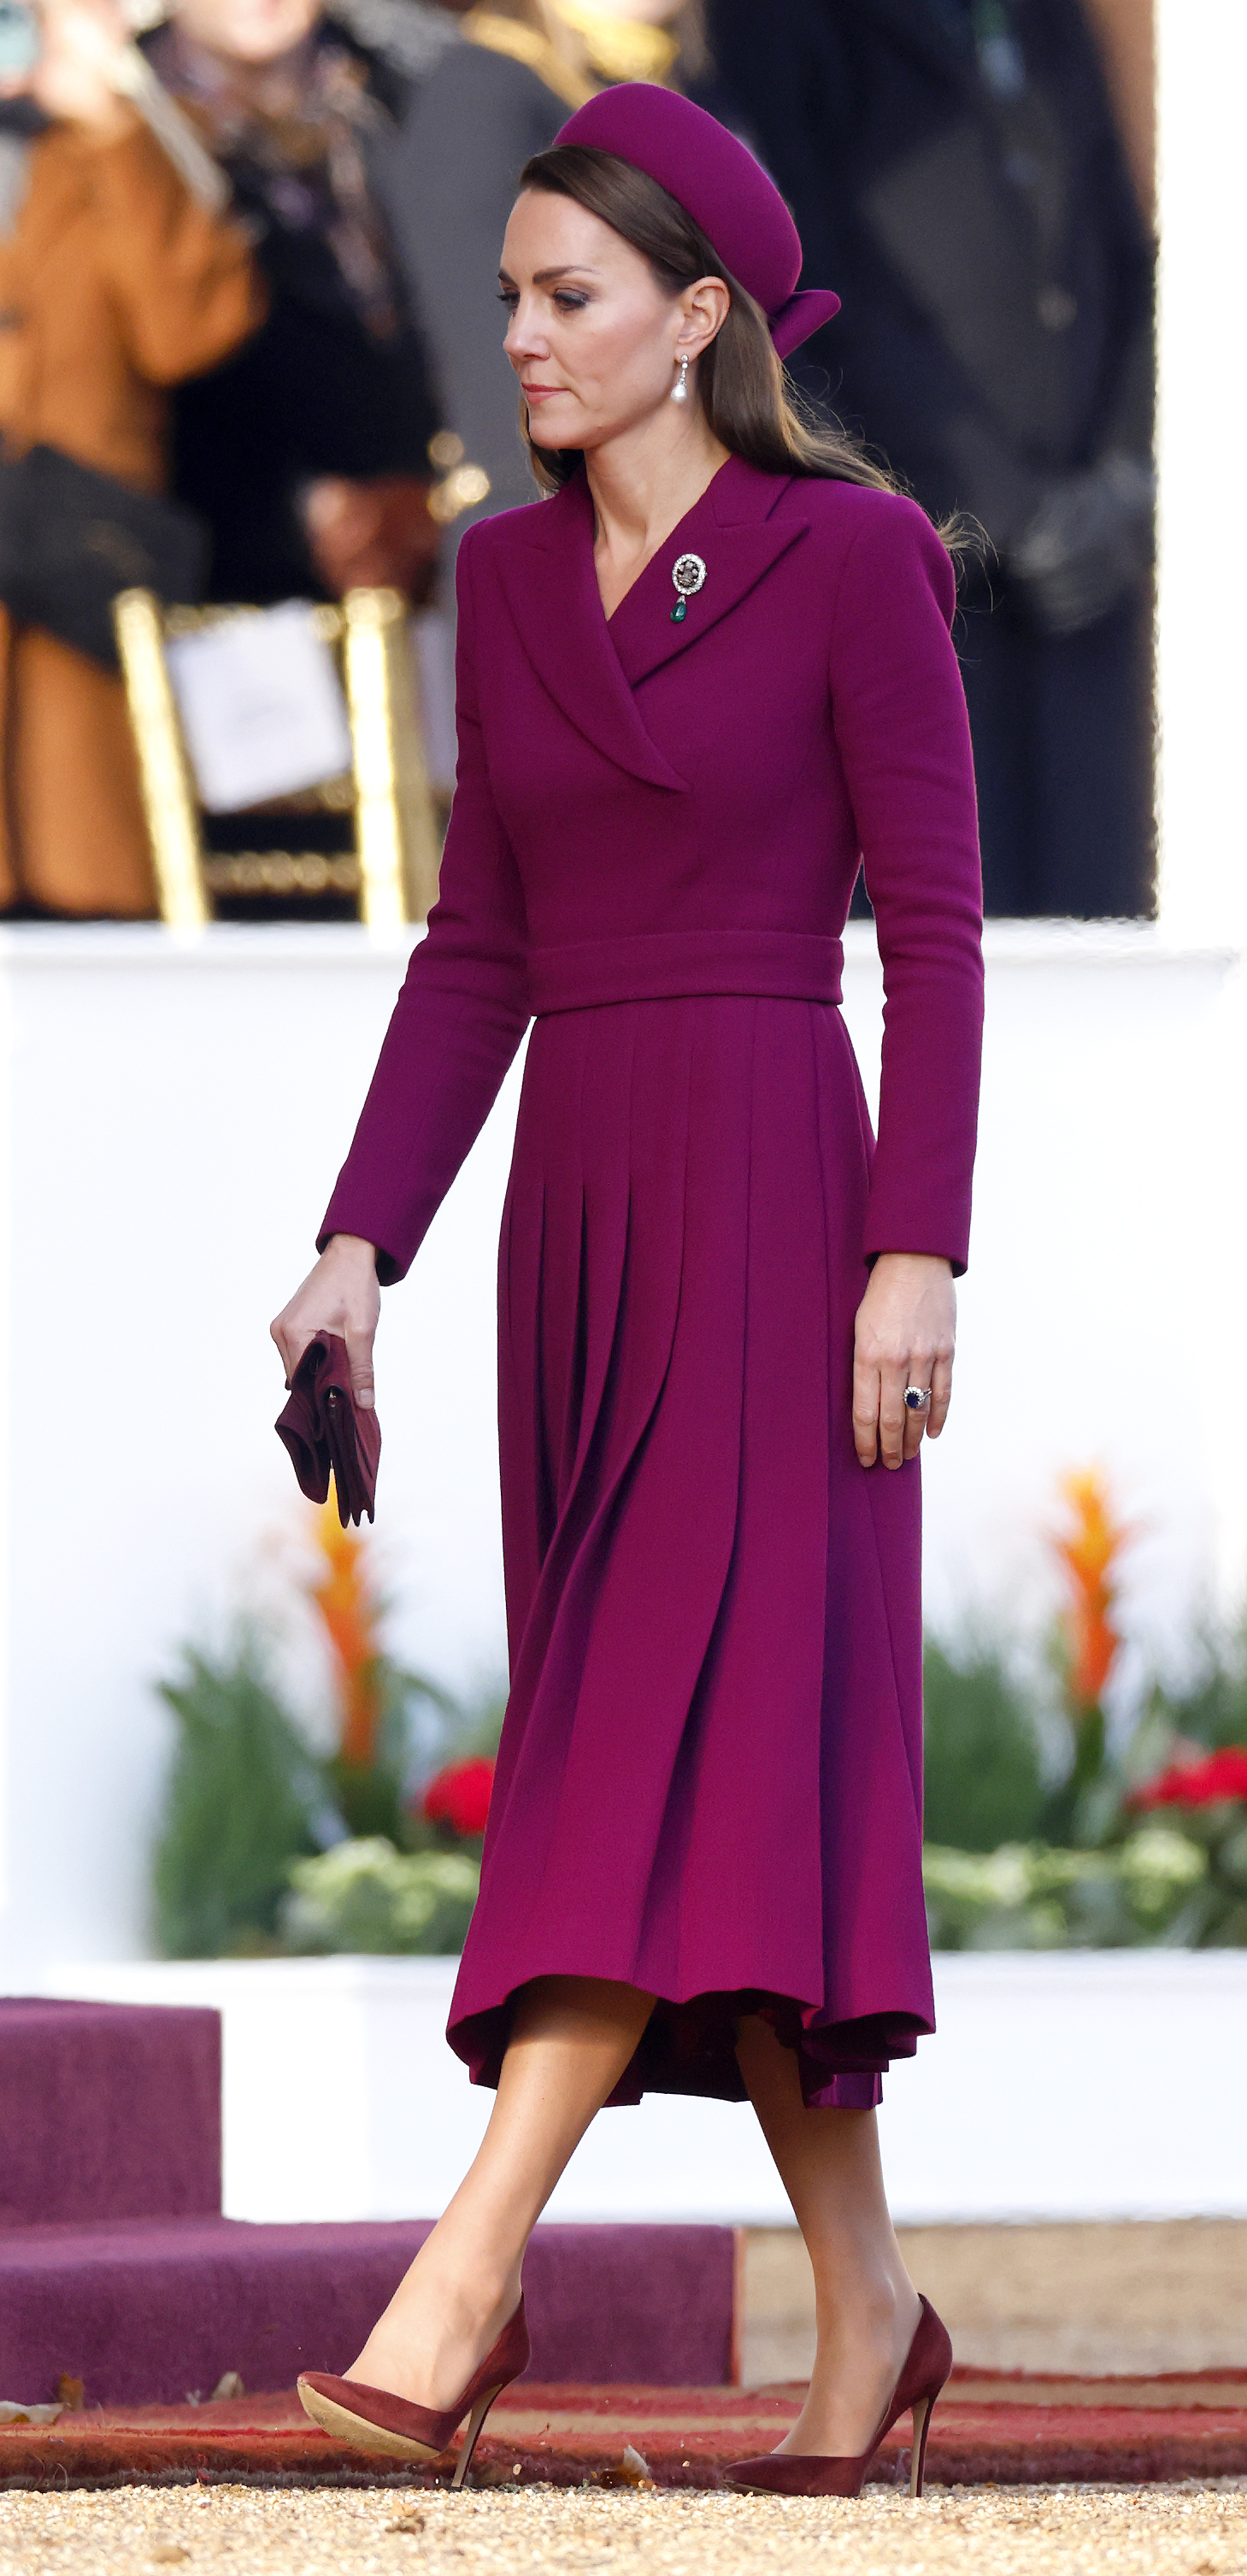 Catherine, Princess of Wales attends the Ceremonial Welcome at Horse Guards Parade for President Cyril Ramaphosa on day 1 of his State Visit to the United Kingdom in London, England, on November 22, 2022. | Source: Getty Images